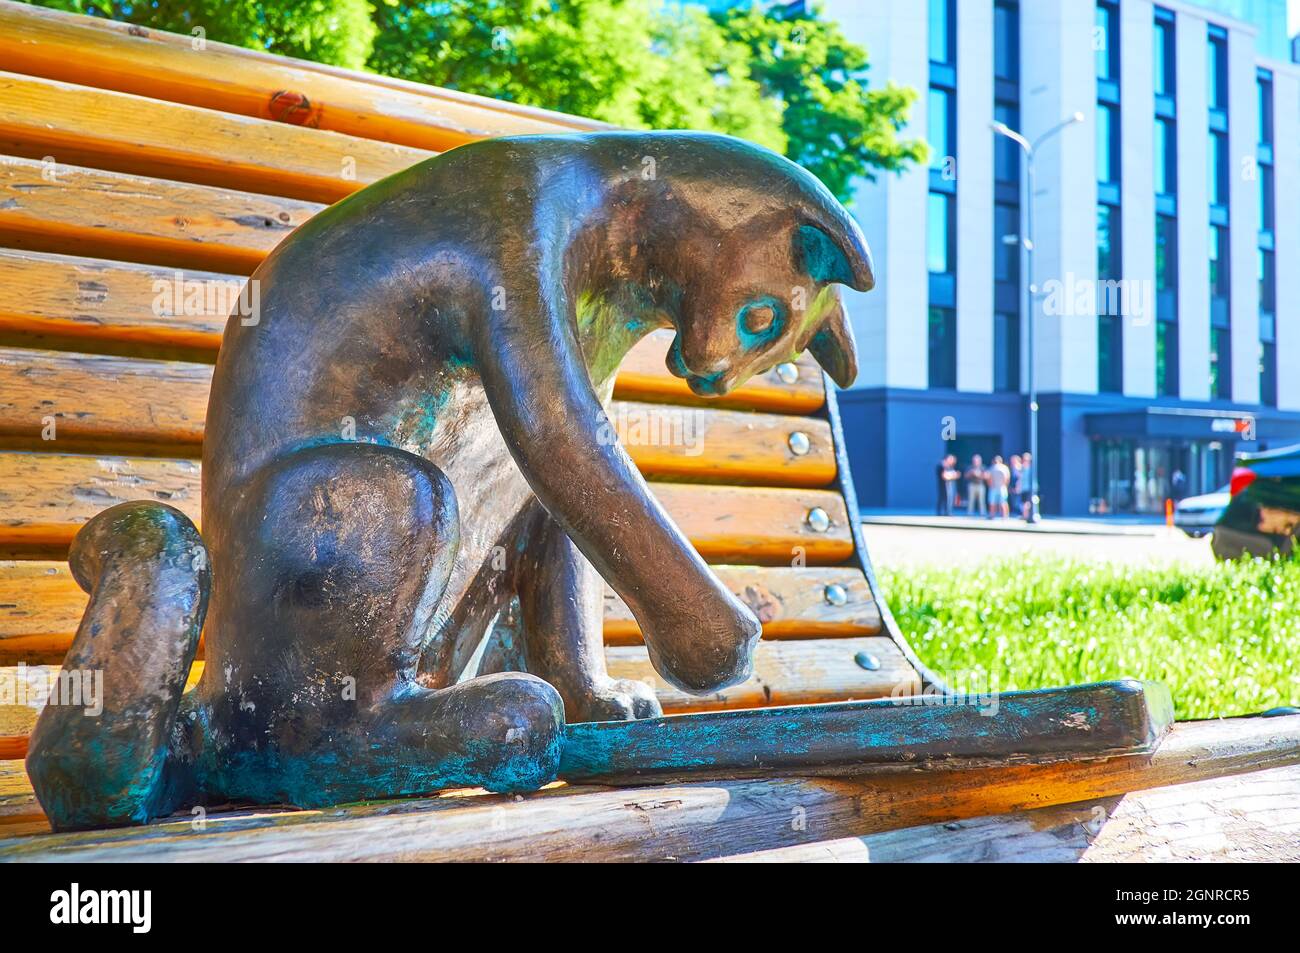 ODESSA, UKRAINE - JUNE 18, 2021: The sculpture by Tatyana Shtykalo, depicting a cat-gamer, playing tablet, on June 18 in Odessa Stock Photo